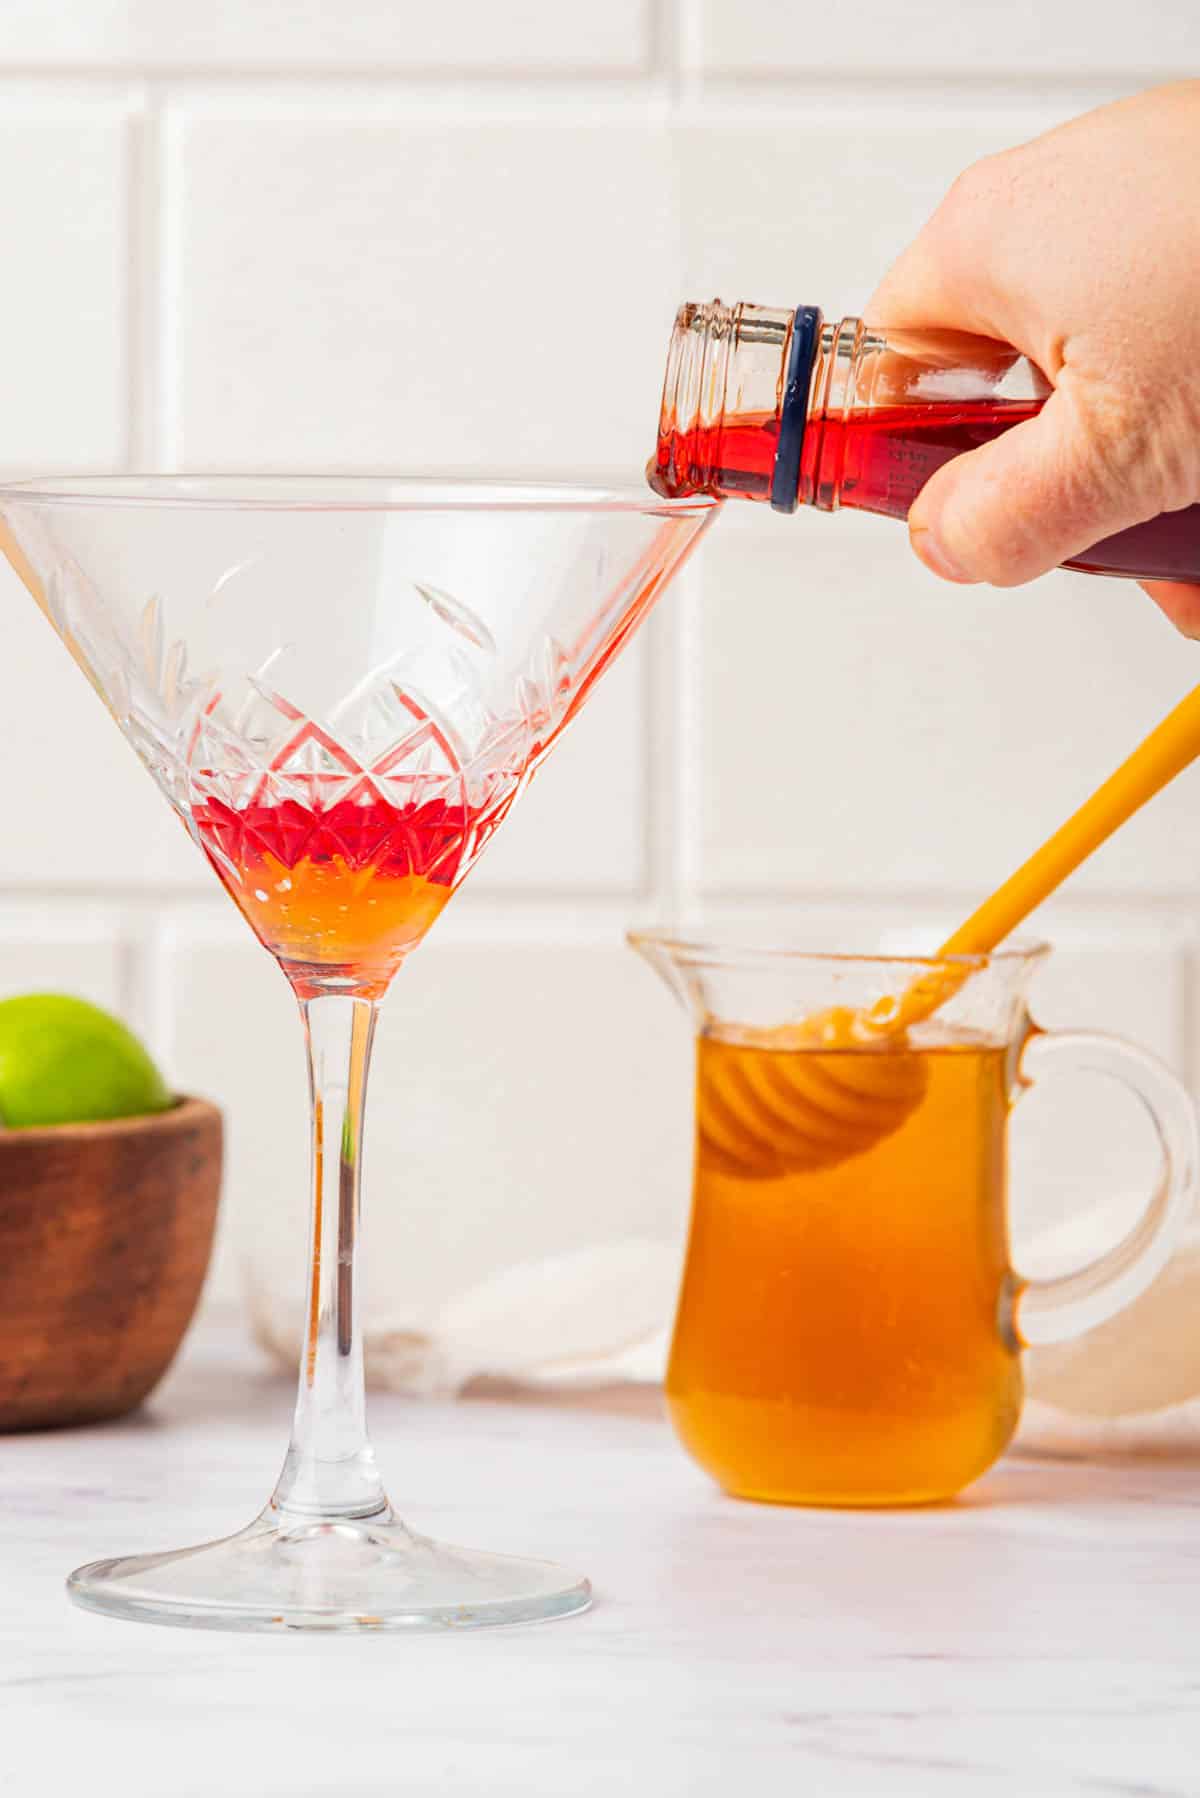 Pouring red liquid over honey in a martini glass.